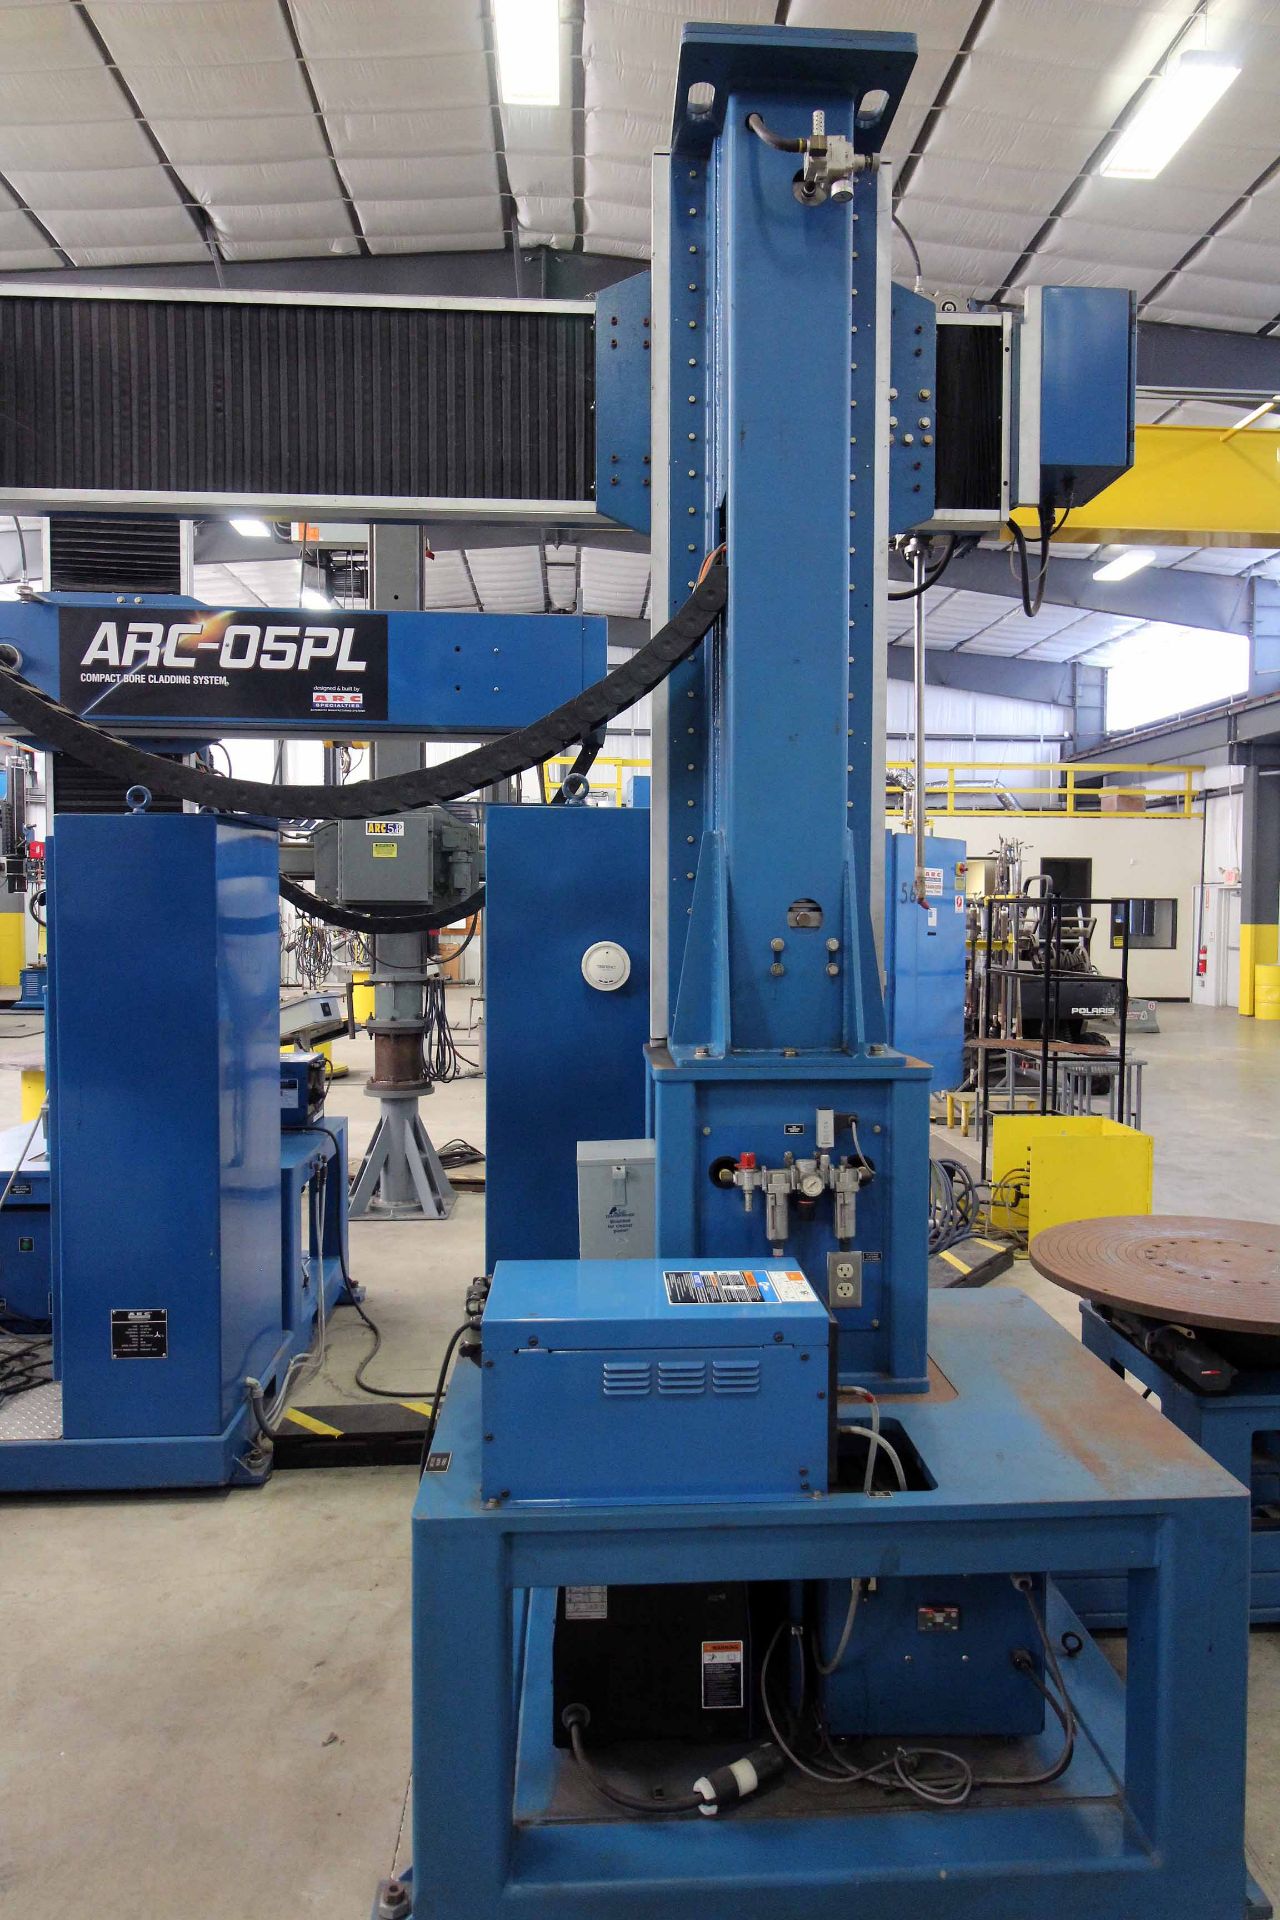 BORE CLADDING SYSTEM, ARC SPECIALTIES MDL. ARC-05PL, new 2014, 5,000 amps, Miller Mdl. XMT450 CC/ - Image 5 of 5